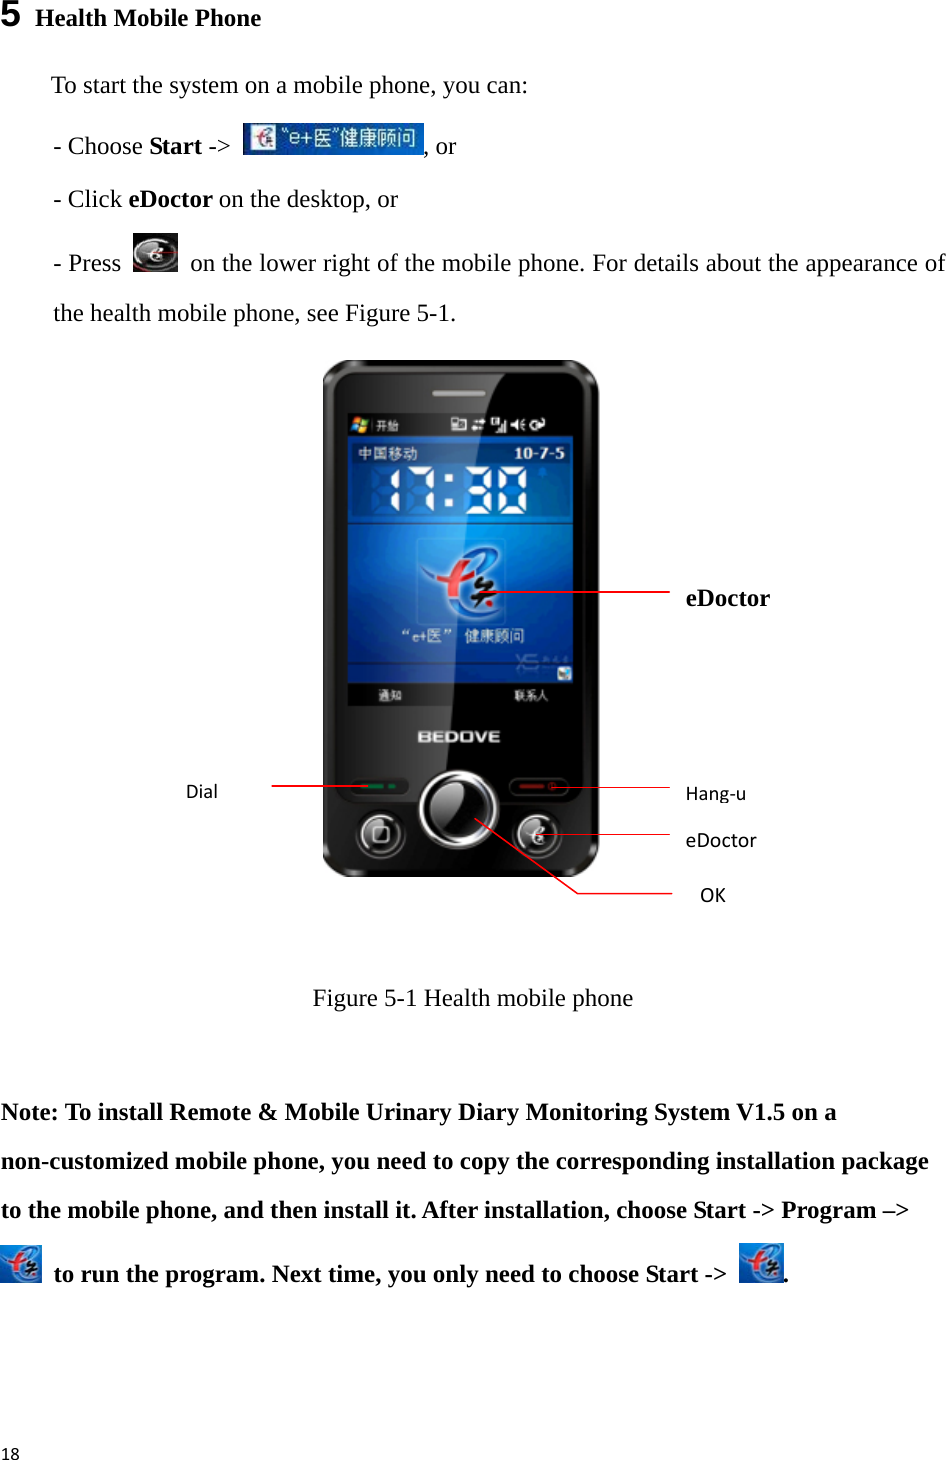 185   Health Mobile Phone To start the system on a mobile phone, you can: - Choose Start -&gt;  , or - Click eDoctor on the desktop, or - Press    on the lower right of the mobile phone. For details about the appearance of the health mobile phone, see Figure 5-1.            Figure 5-1 Health mobile phone  Note: To install Remote &amp; Mobile Urinary Diary Monitoring System V1.5 on a non-customized mobile phone, you need to copy the corresponding installation package to the mobile phone, and then install it. After installation, choose Start -&gt; Program –&gt;   to run the program. Next time, you only need to choose Start -&gt;  . OKDialeDoctorHang‐ueDoctor